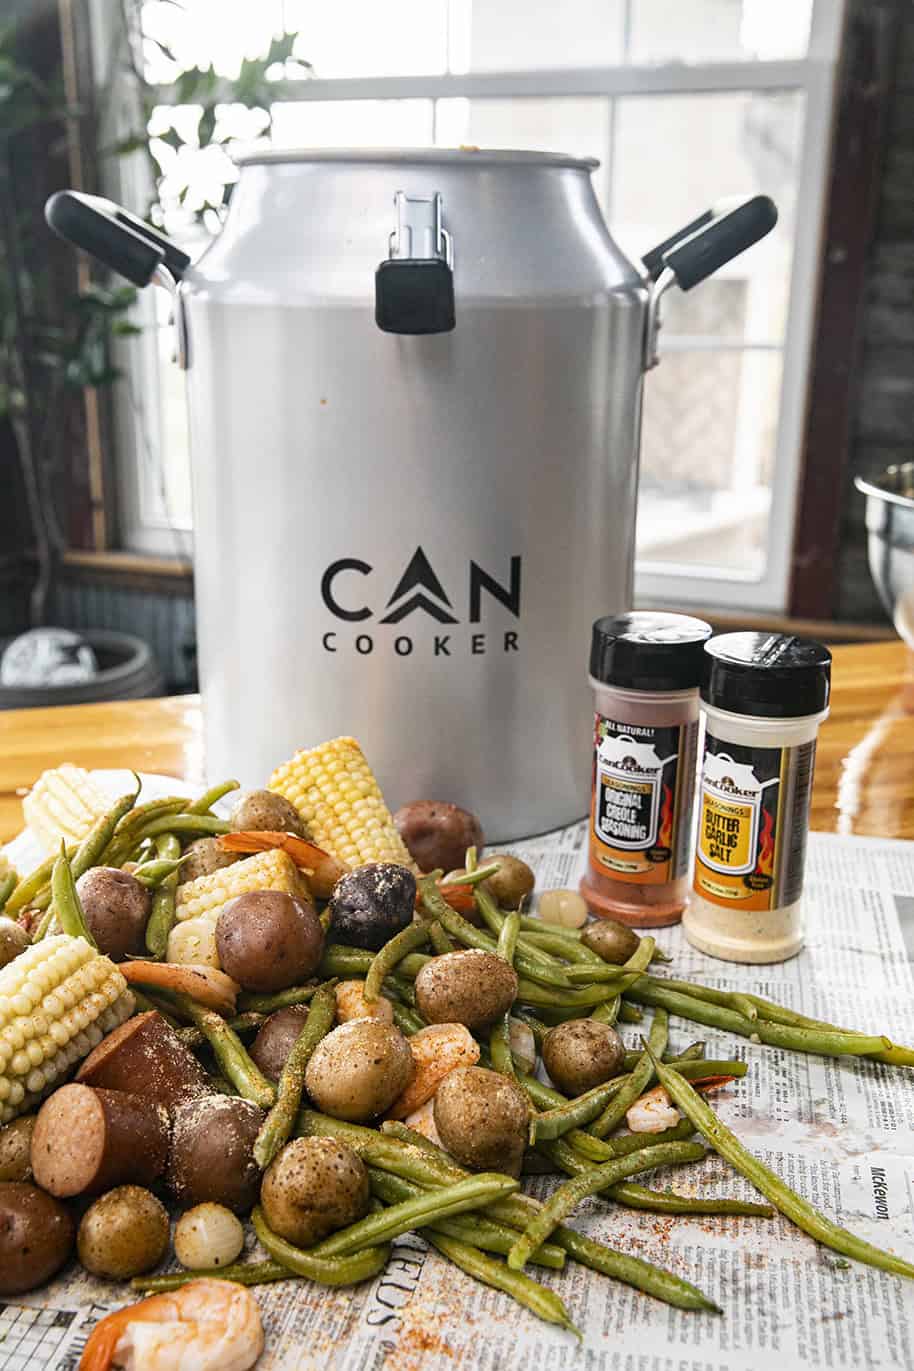 https://www.cancooker.com/wp-content/uploads/2022/04/Spring-Country-Boil-041922-14-web.jpg